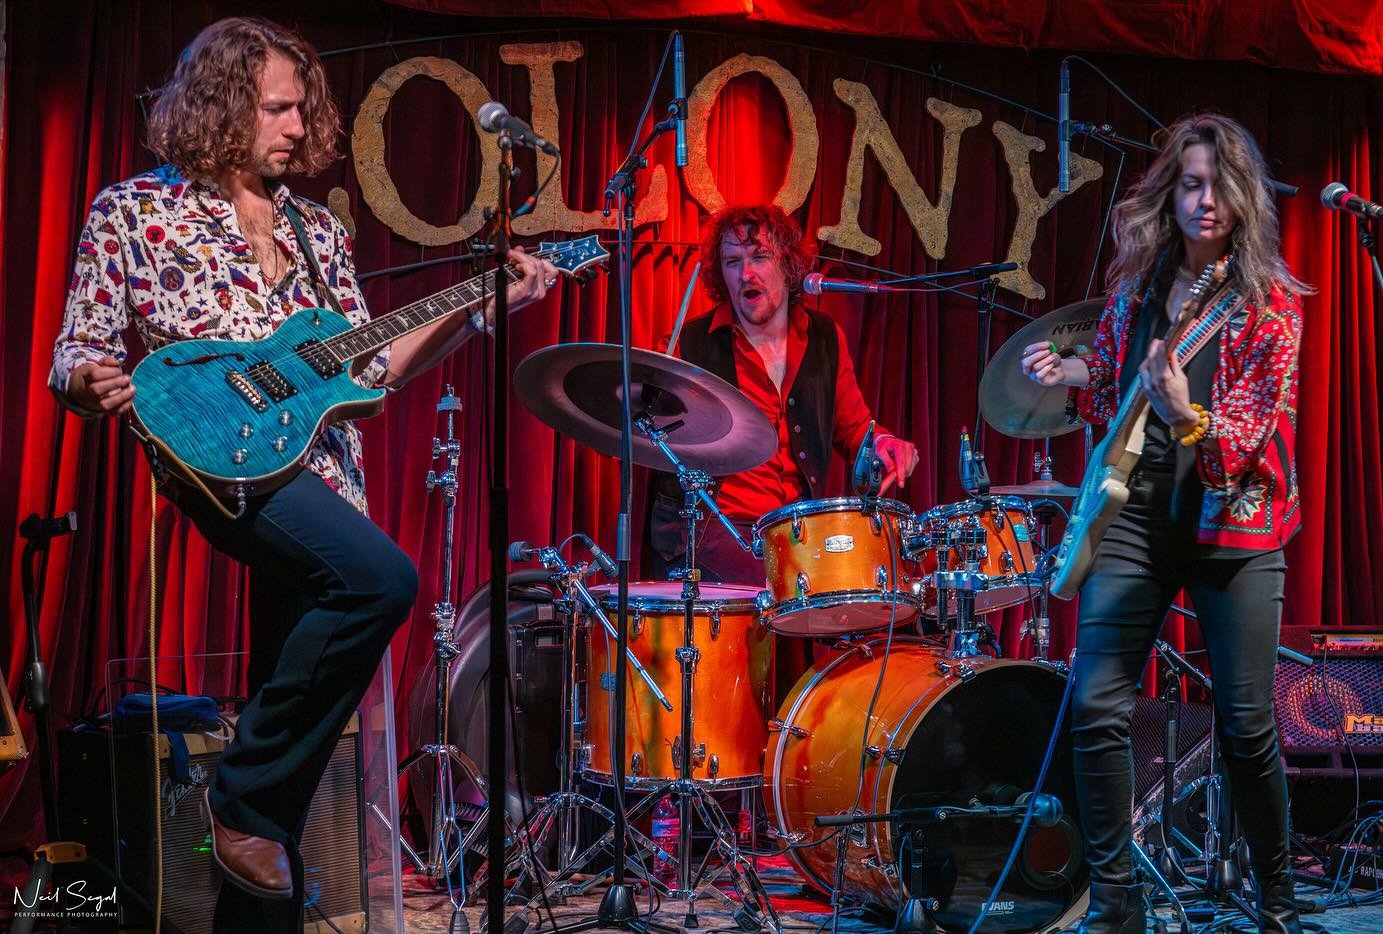 What a night in Woodstock! ✨Thanks to everyone who came to rock out with us @colonywoodstockny 🤘 one more chance to get rowdy with us this Saturday 5/4 @thebitterendnyc at 9pm - see you there!!

Special thanks to @neil_segals_performance_photog for 